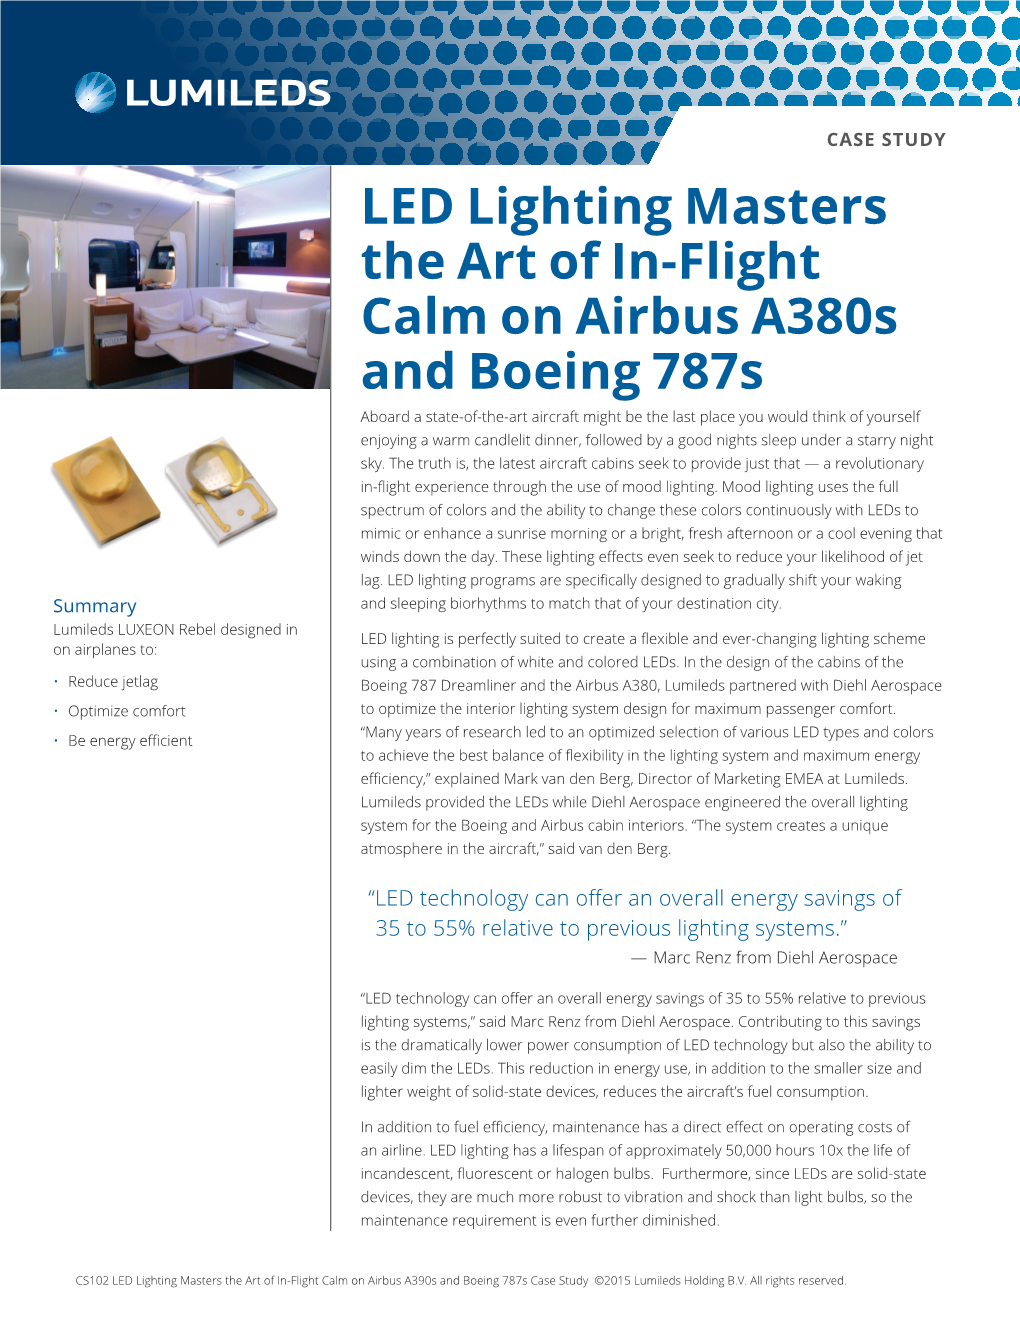 LED Lighting Masters the Art of In-Flight Calm on Airbus A380s And